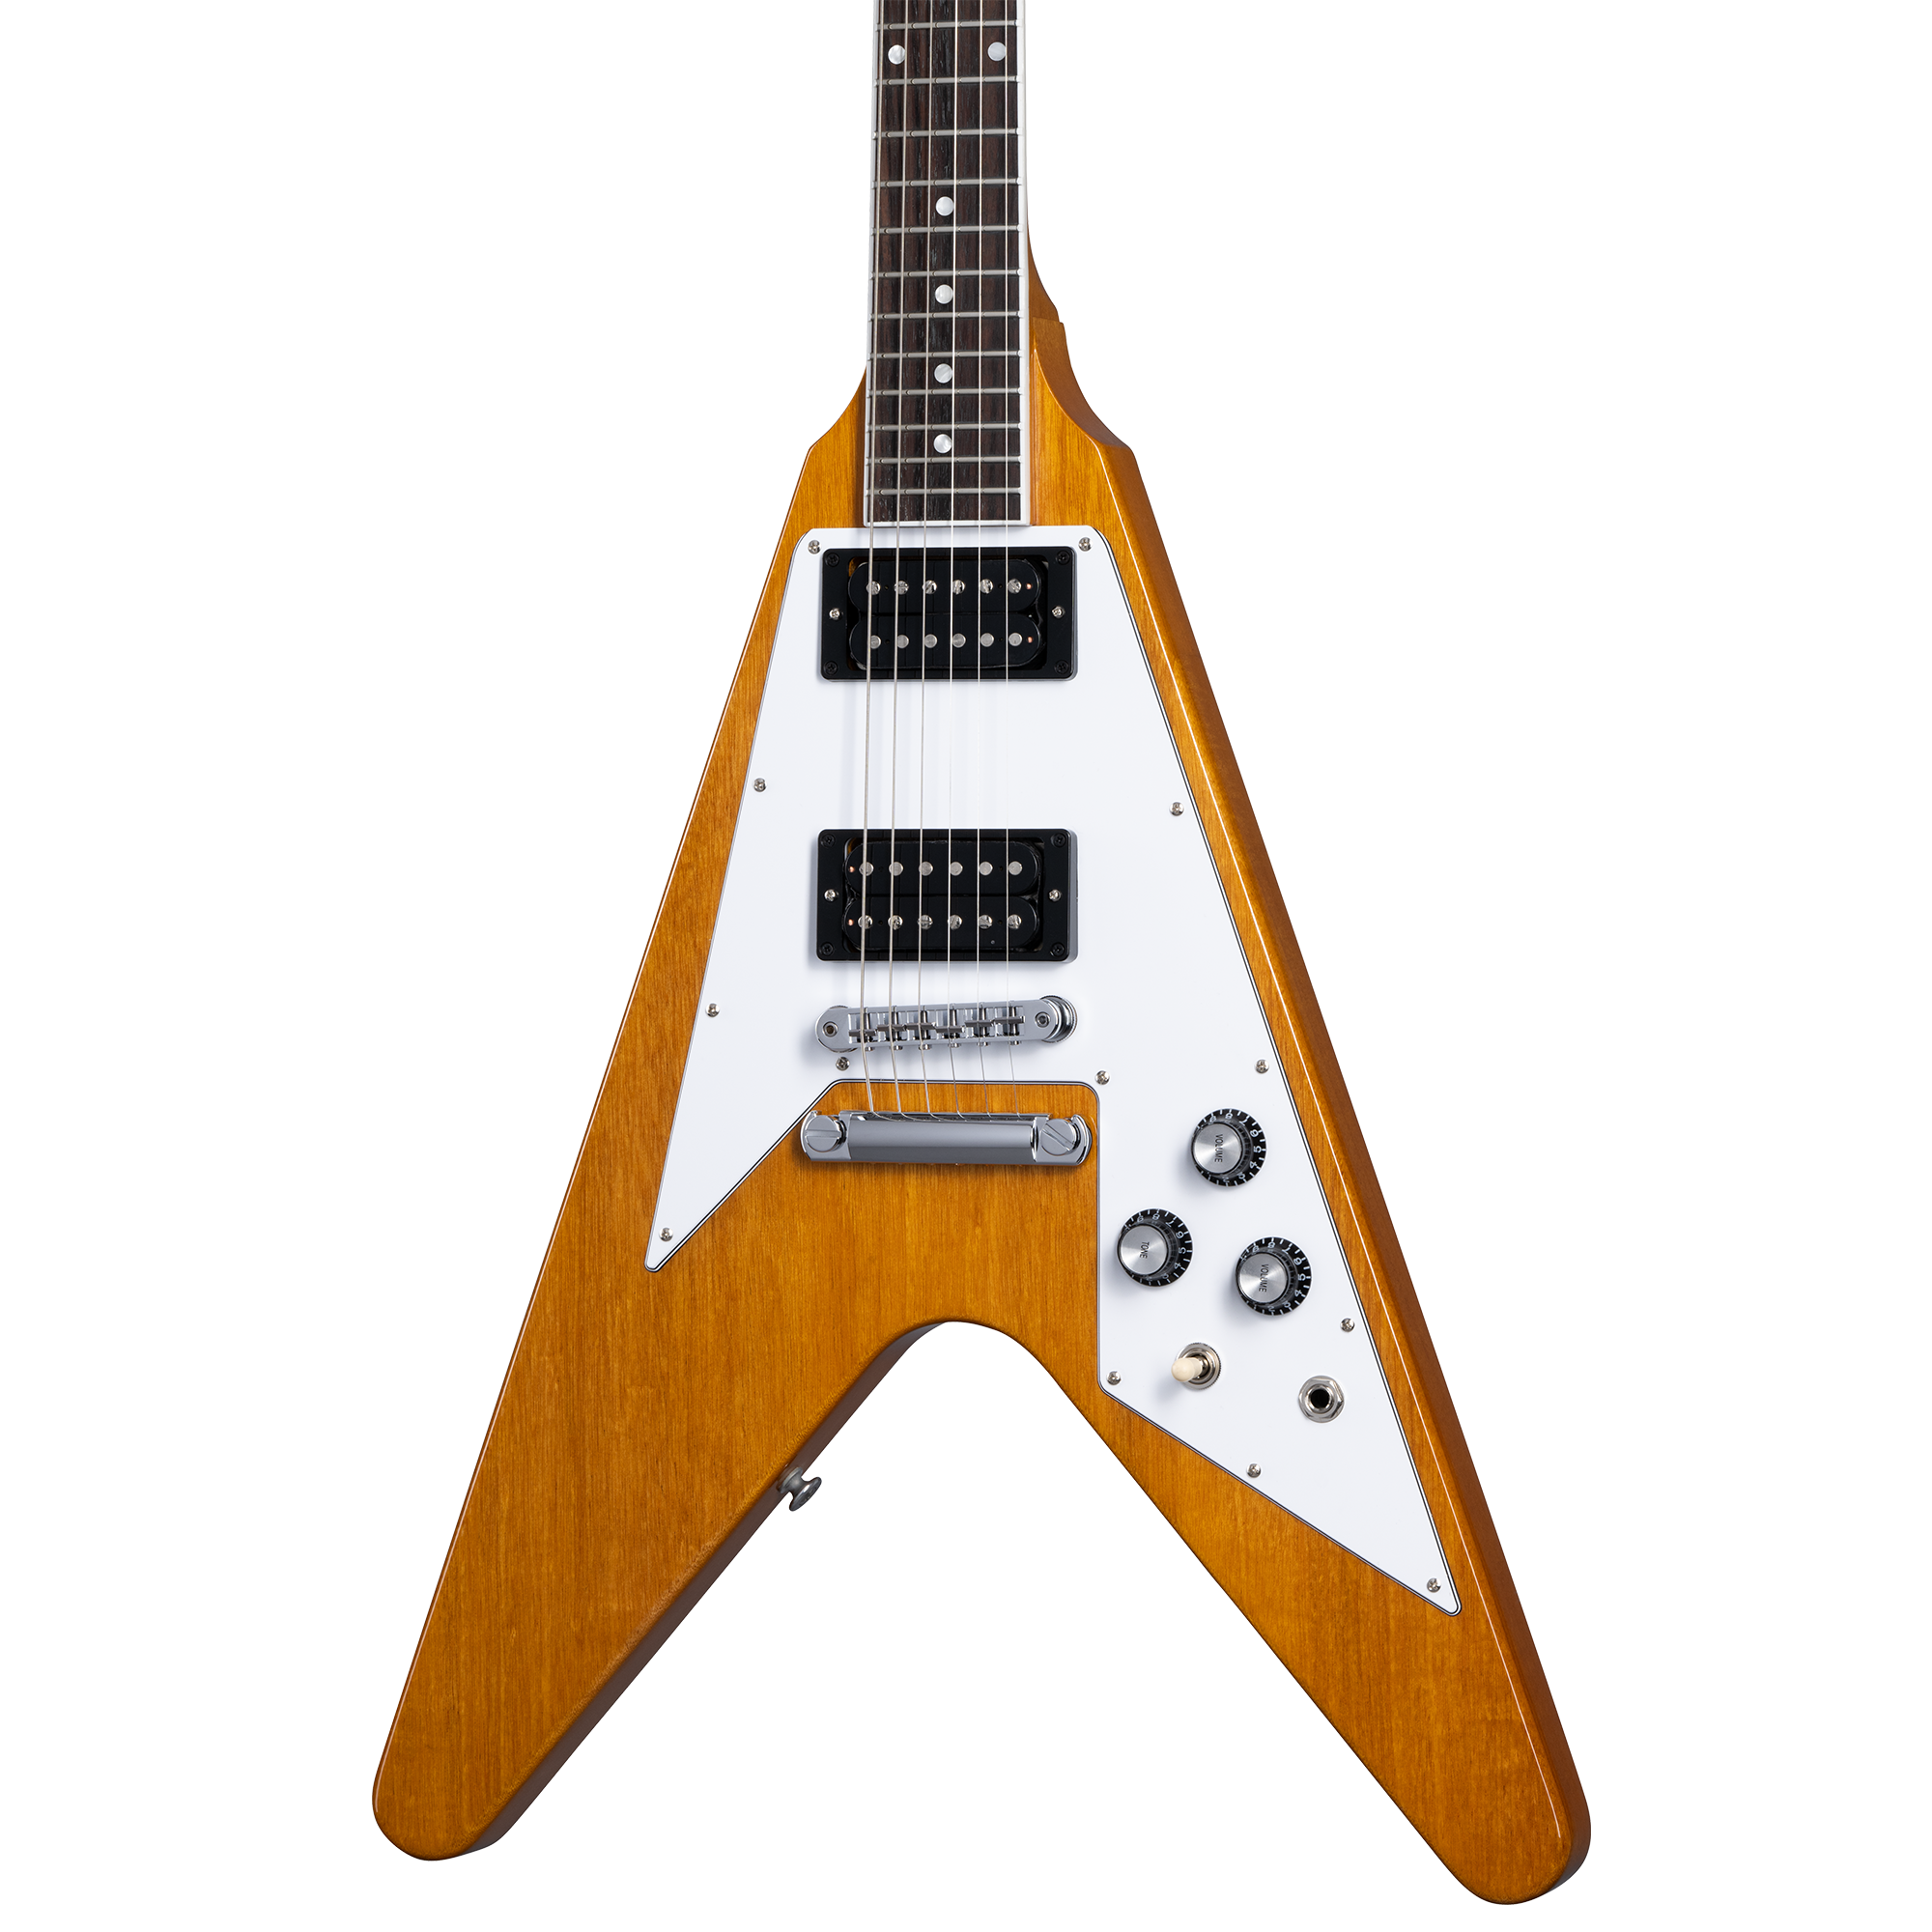 GIBSON 70S FLYING V ELECTRIC GUITAR - ANTIQUE NATURAL